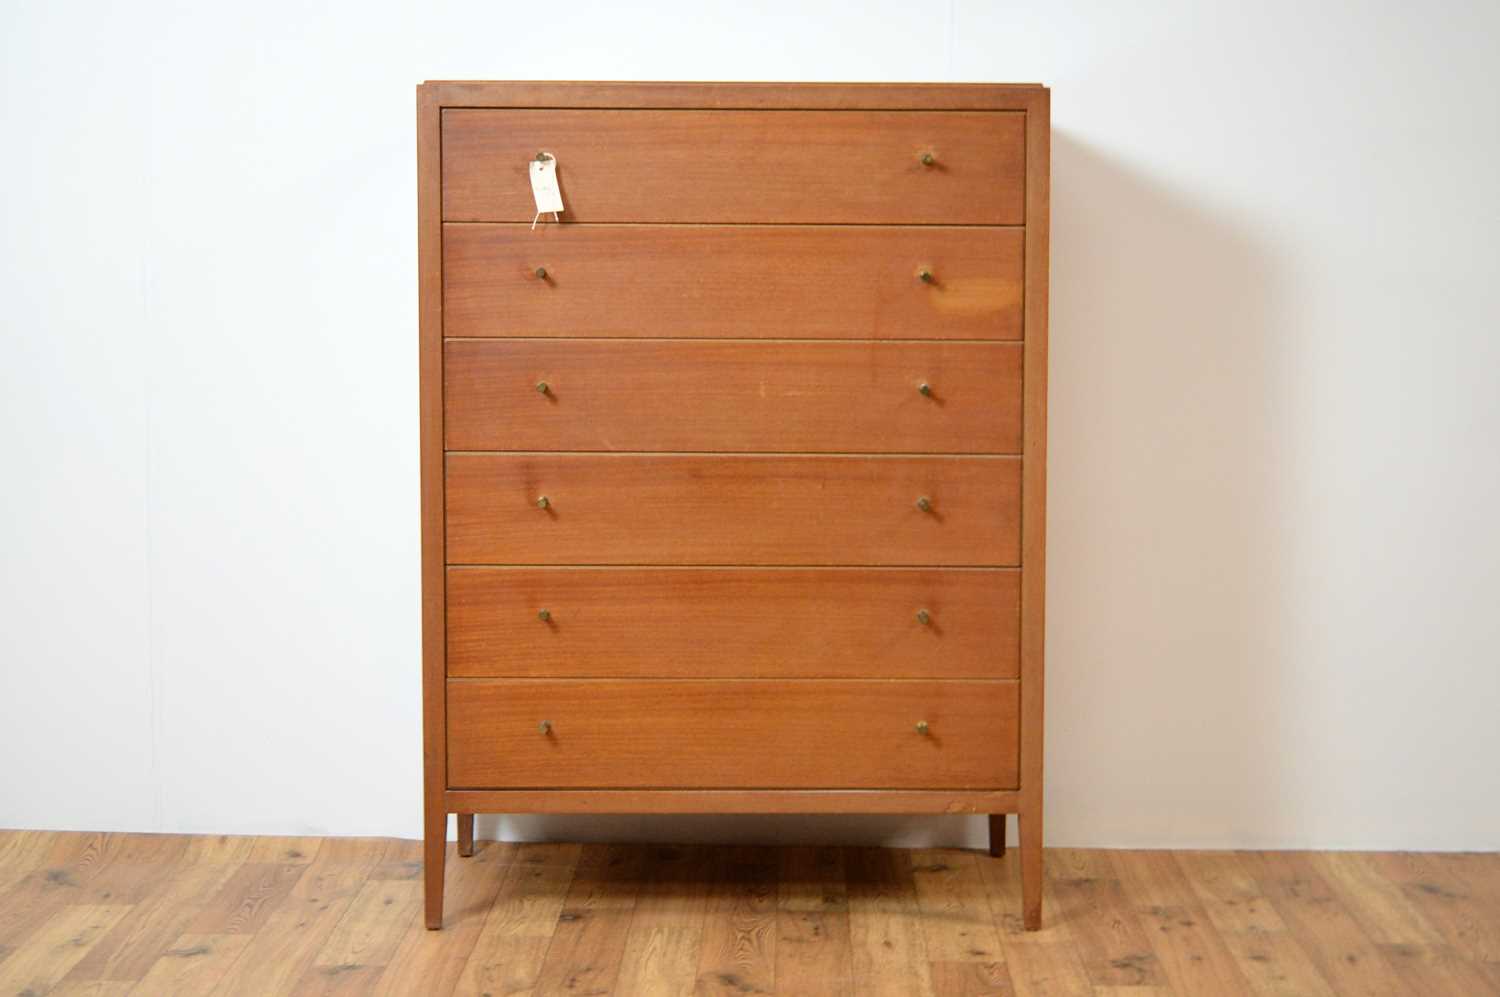 A retro vintage mid 20th Century circa 1960s teak wood chest of drawers - Image 2 of 6